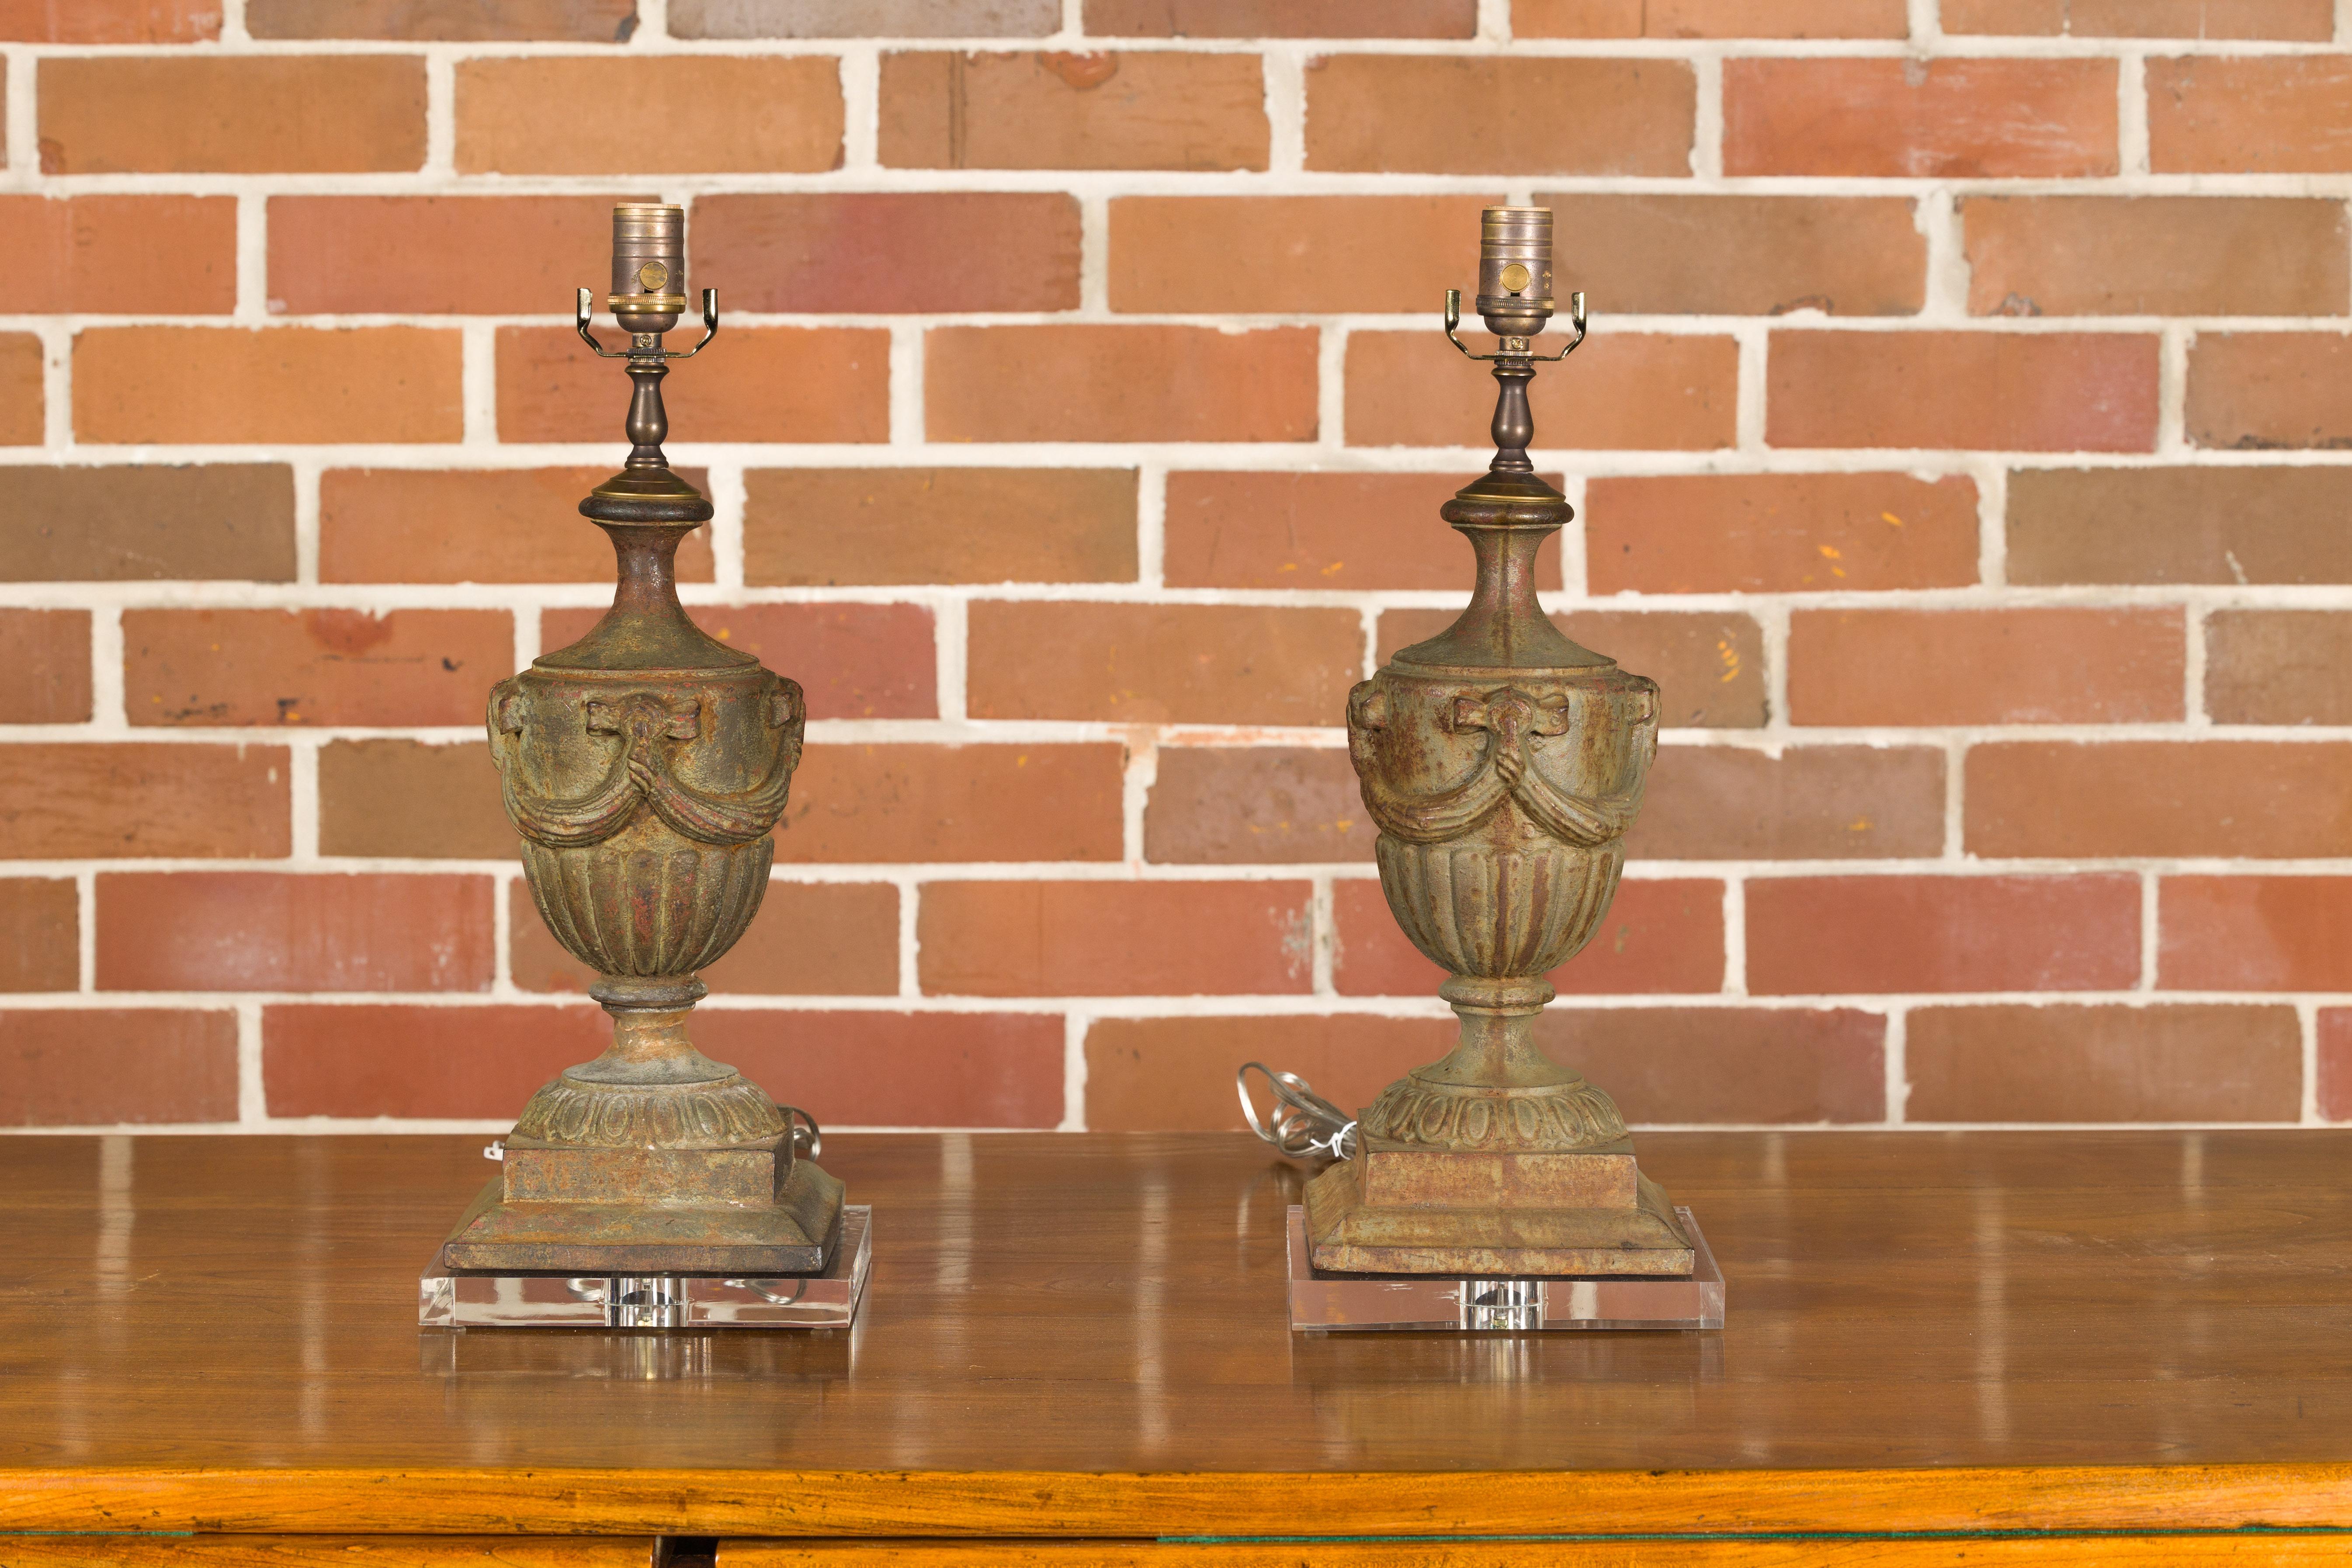 A pair of Neoclassical style iron vase table lamps from the mid 20th century with swag and gadroon motifs, mounted on custom lucite bases. Behold this stunning pair of mid-20th-century Neoclassical-style iron table lamps, a testament to timeless